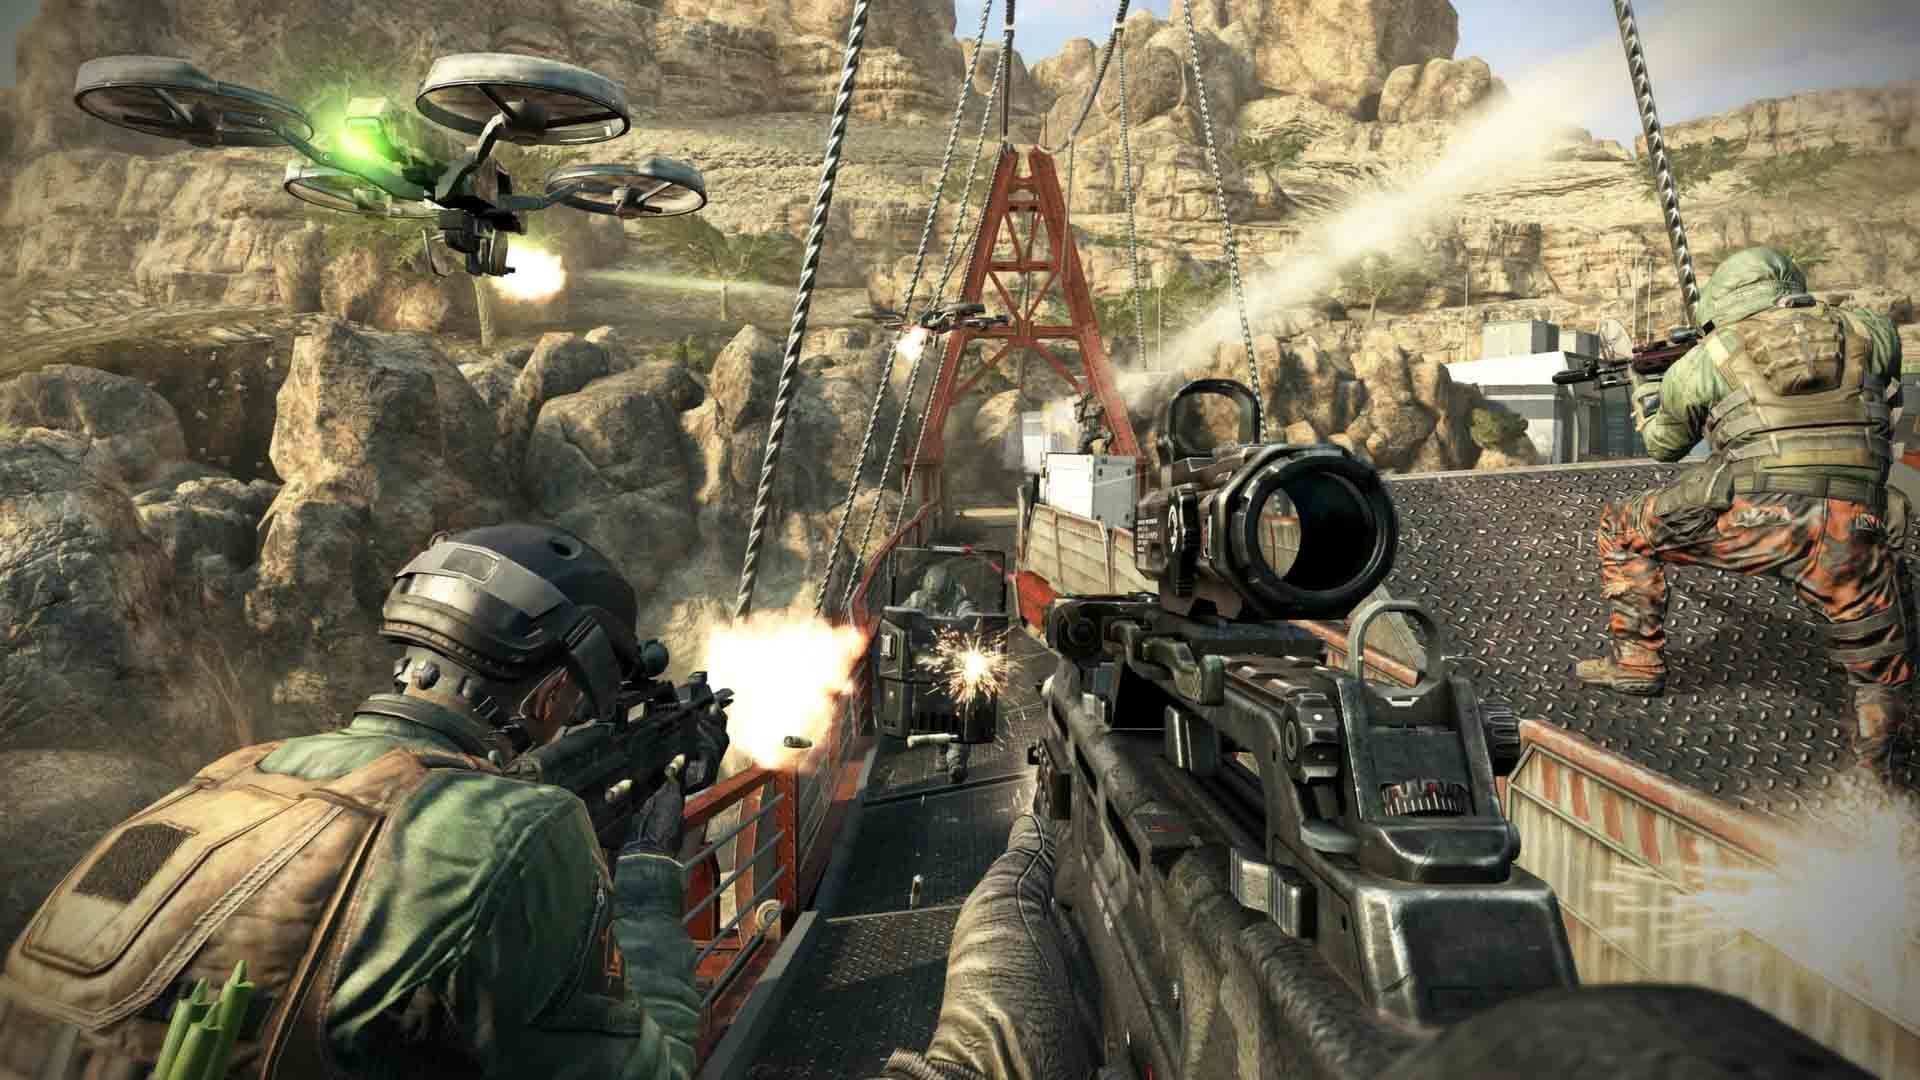 A Stunning Video of the New Call of Duty Game Black Ops: Cold War The World